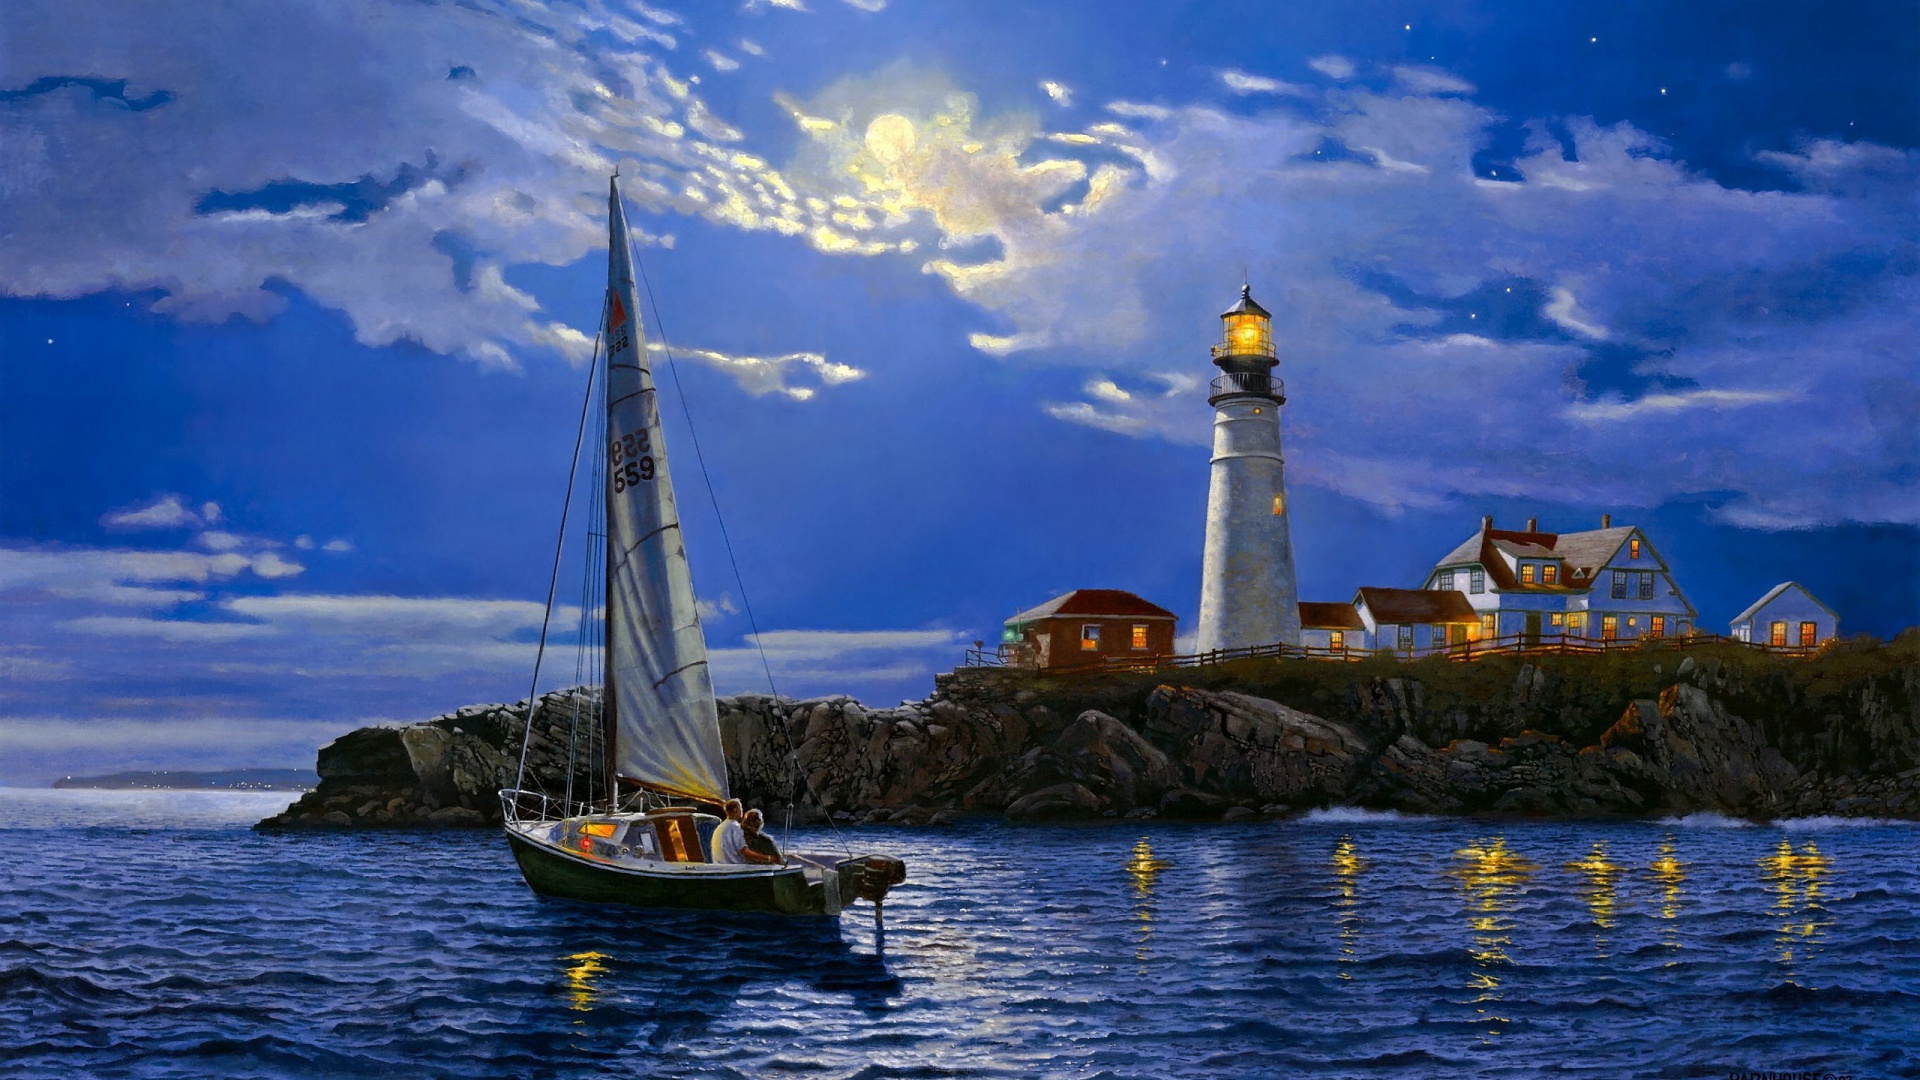  boats architecture lighthouse night mood sky clouds moon wallpaper